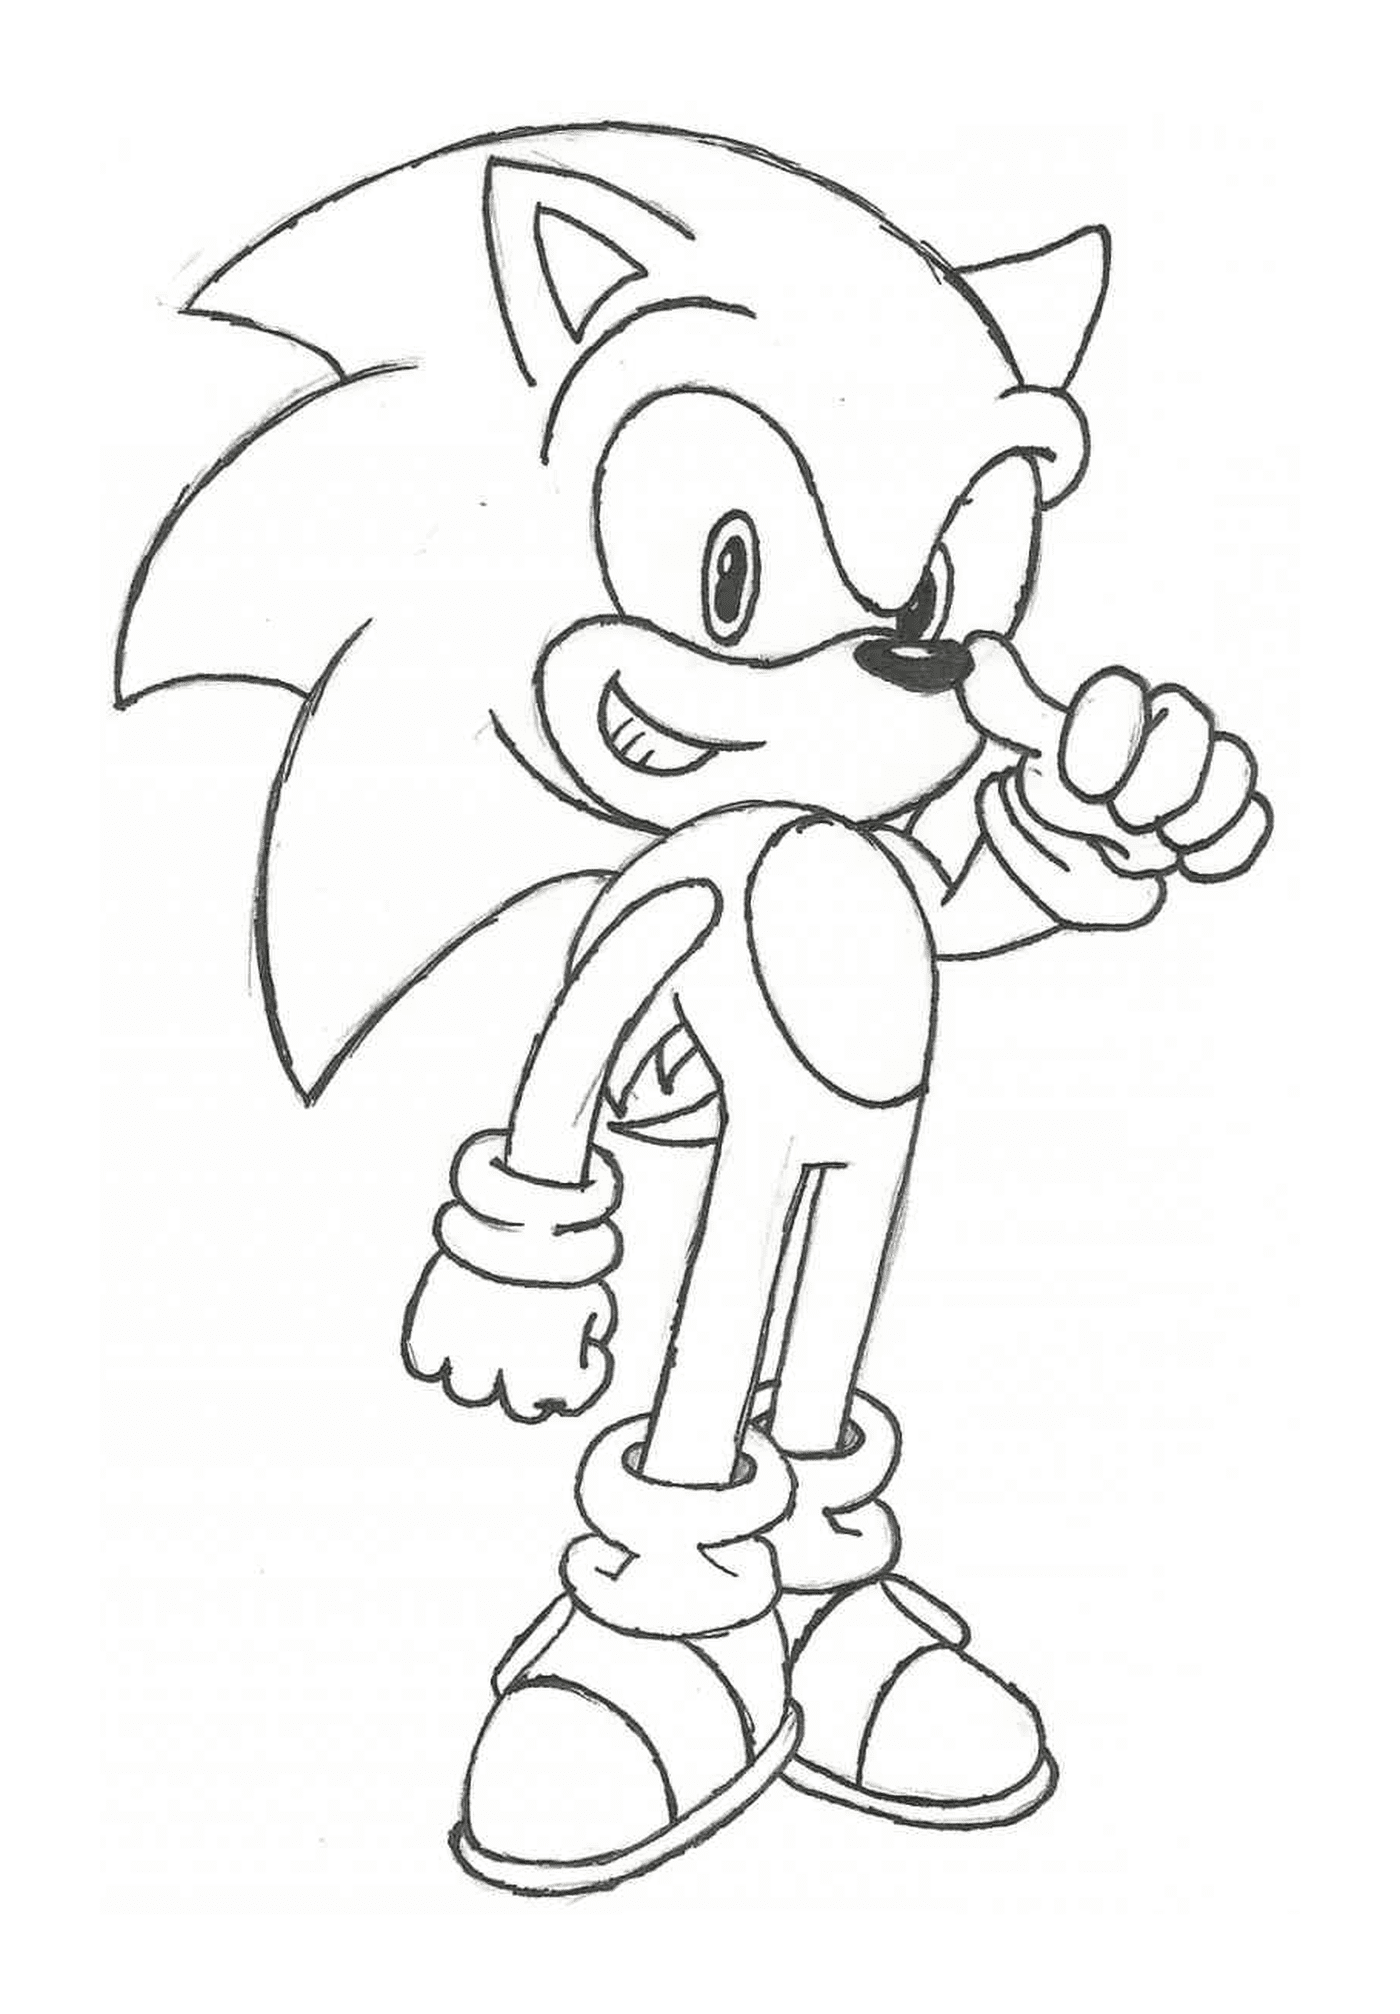  Sonic with a heroic pose 